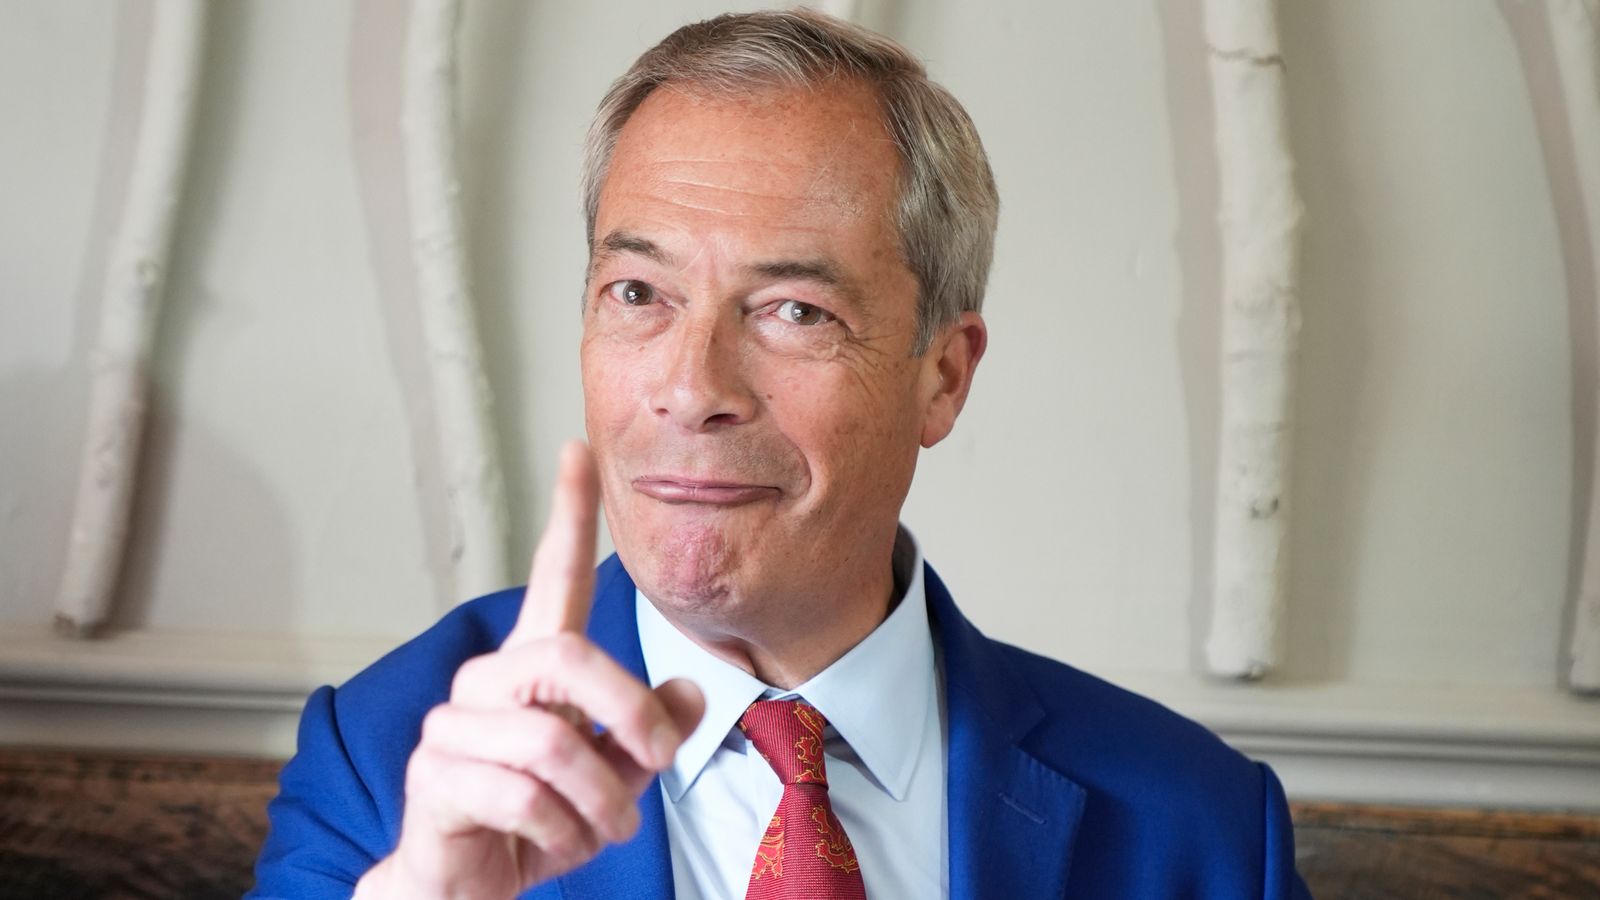 Tories heading for 'warfare', Farage predicts, as ex-Cabinet minister pleads with voters to 'unite the right'